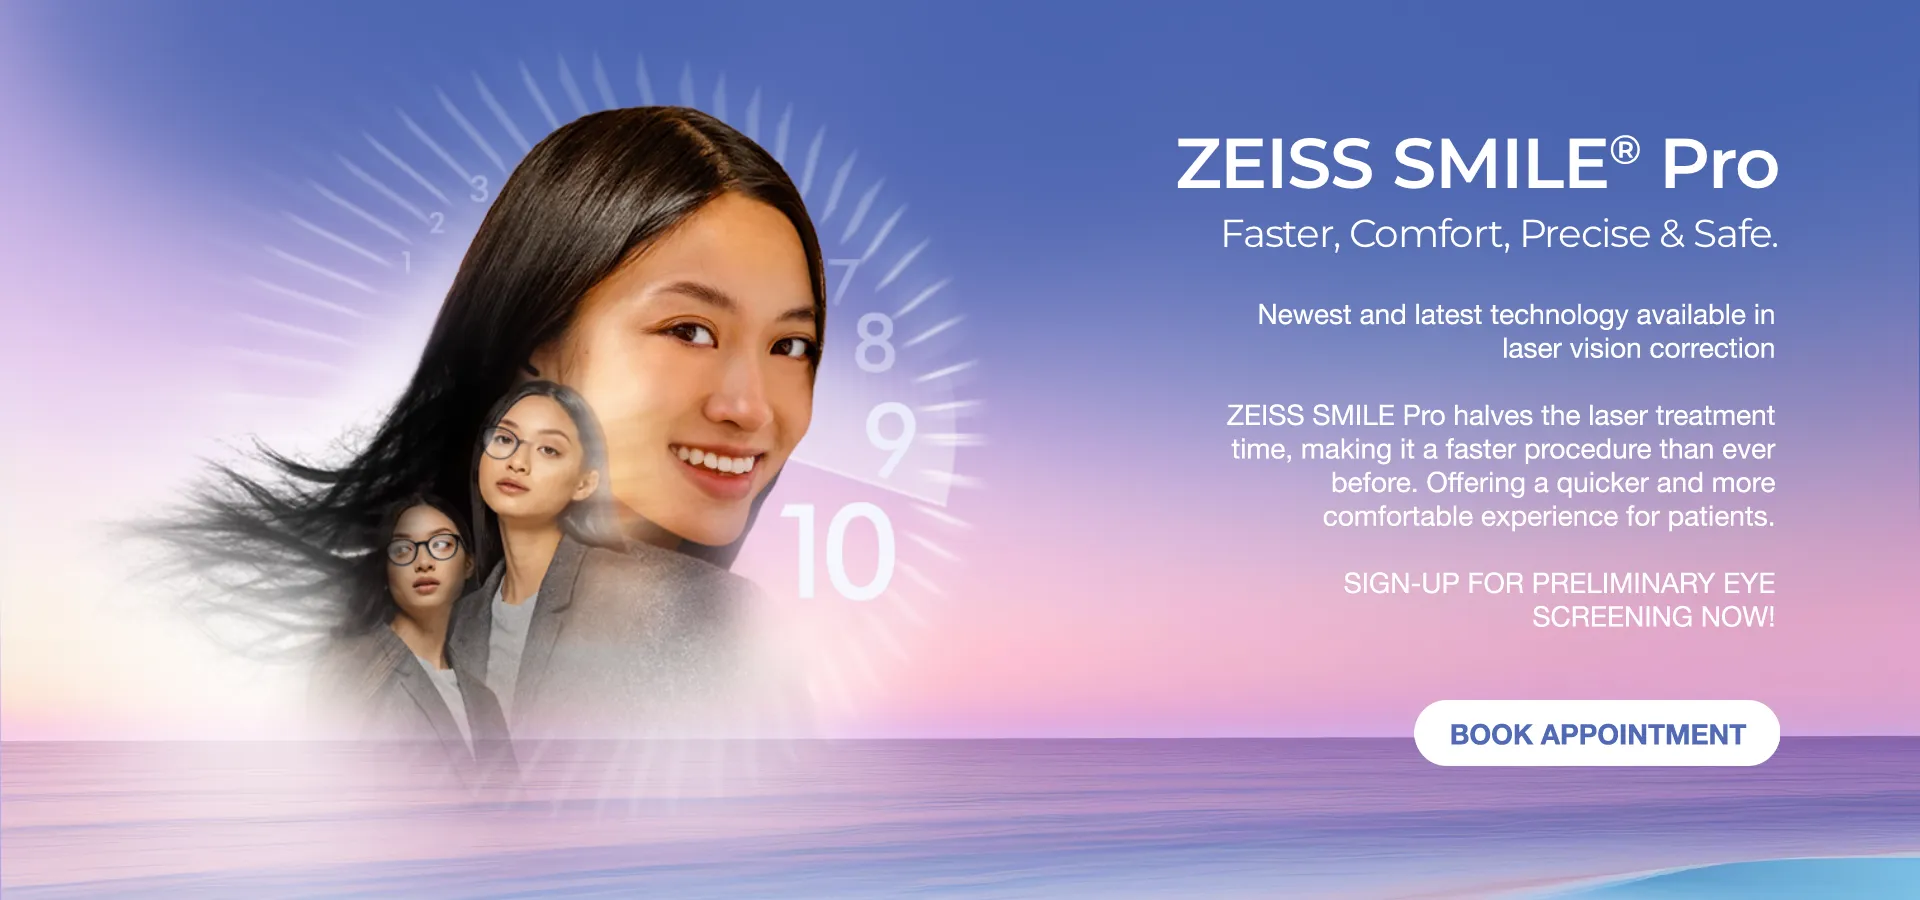 Zeiss Smile Pro